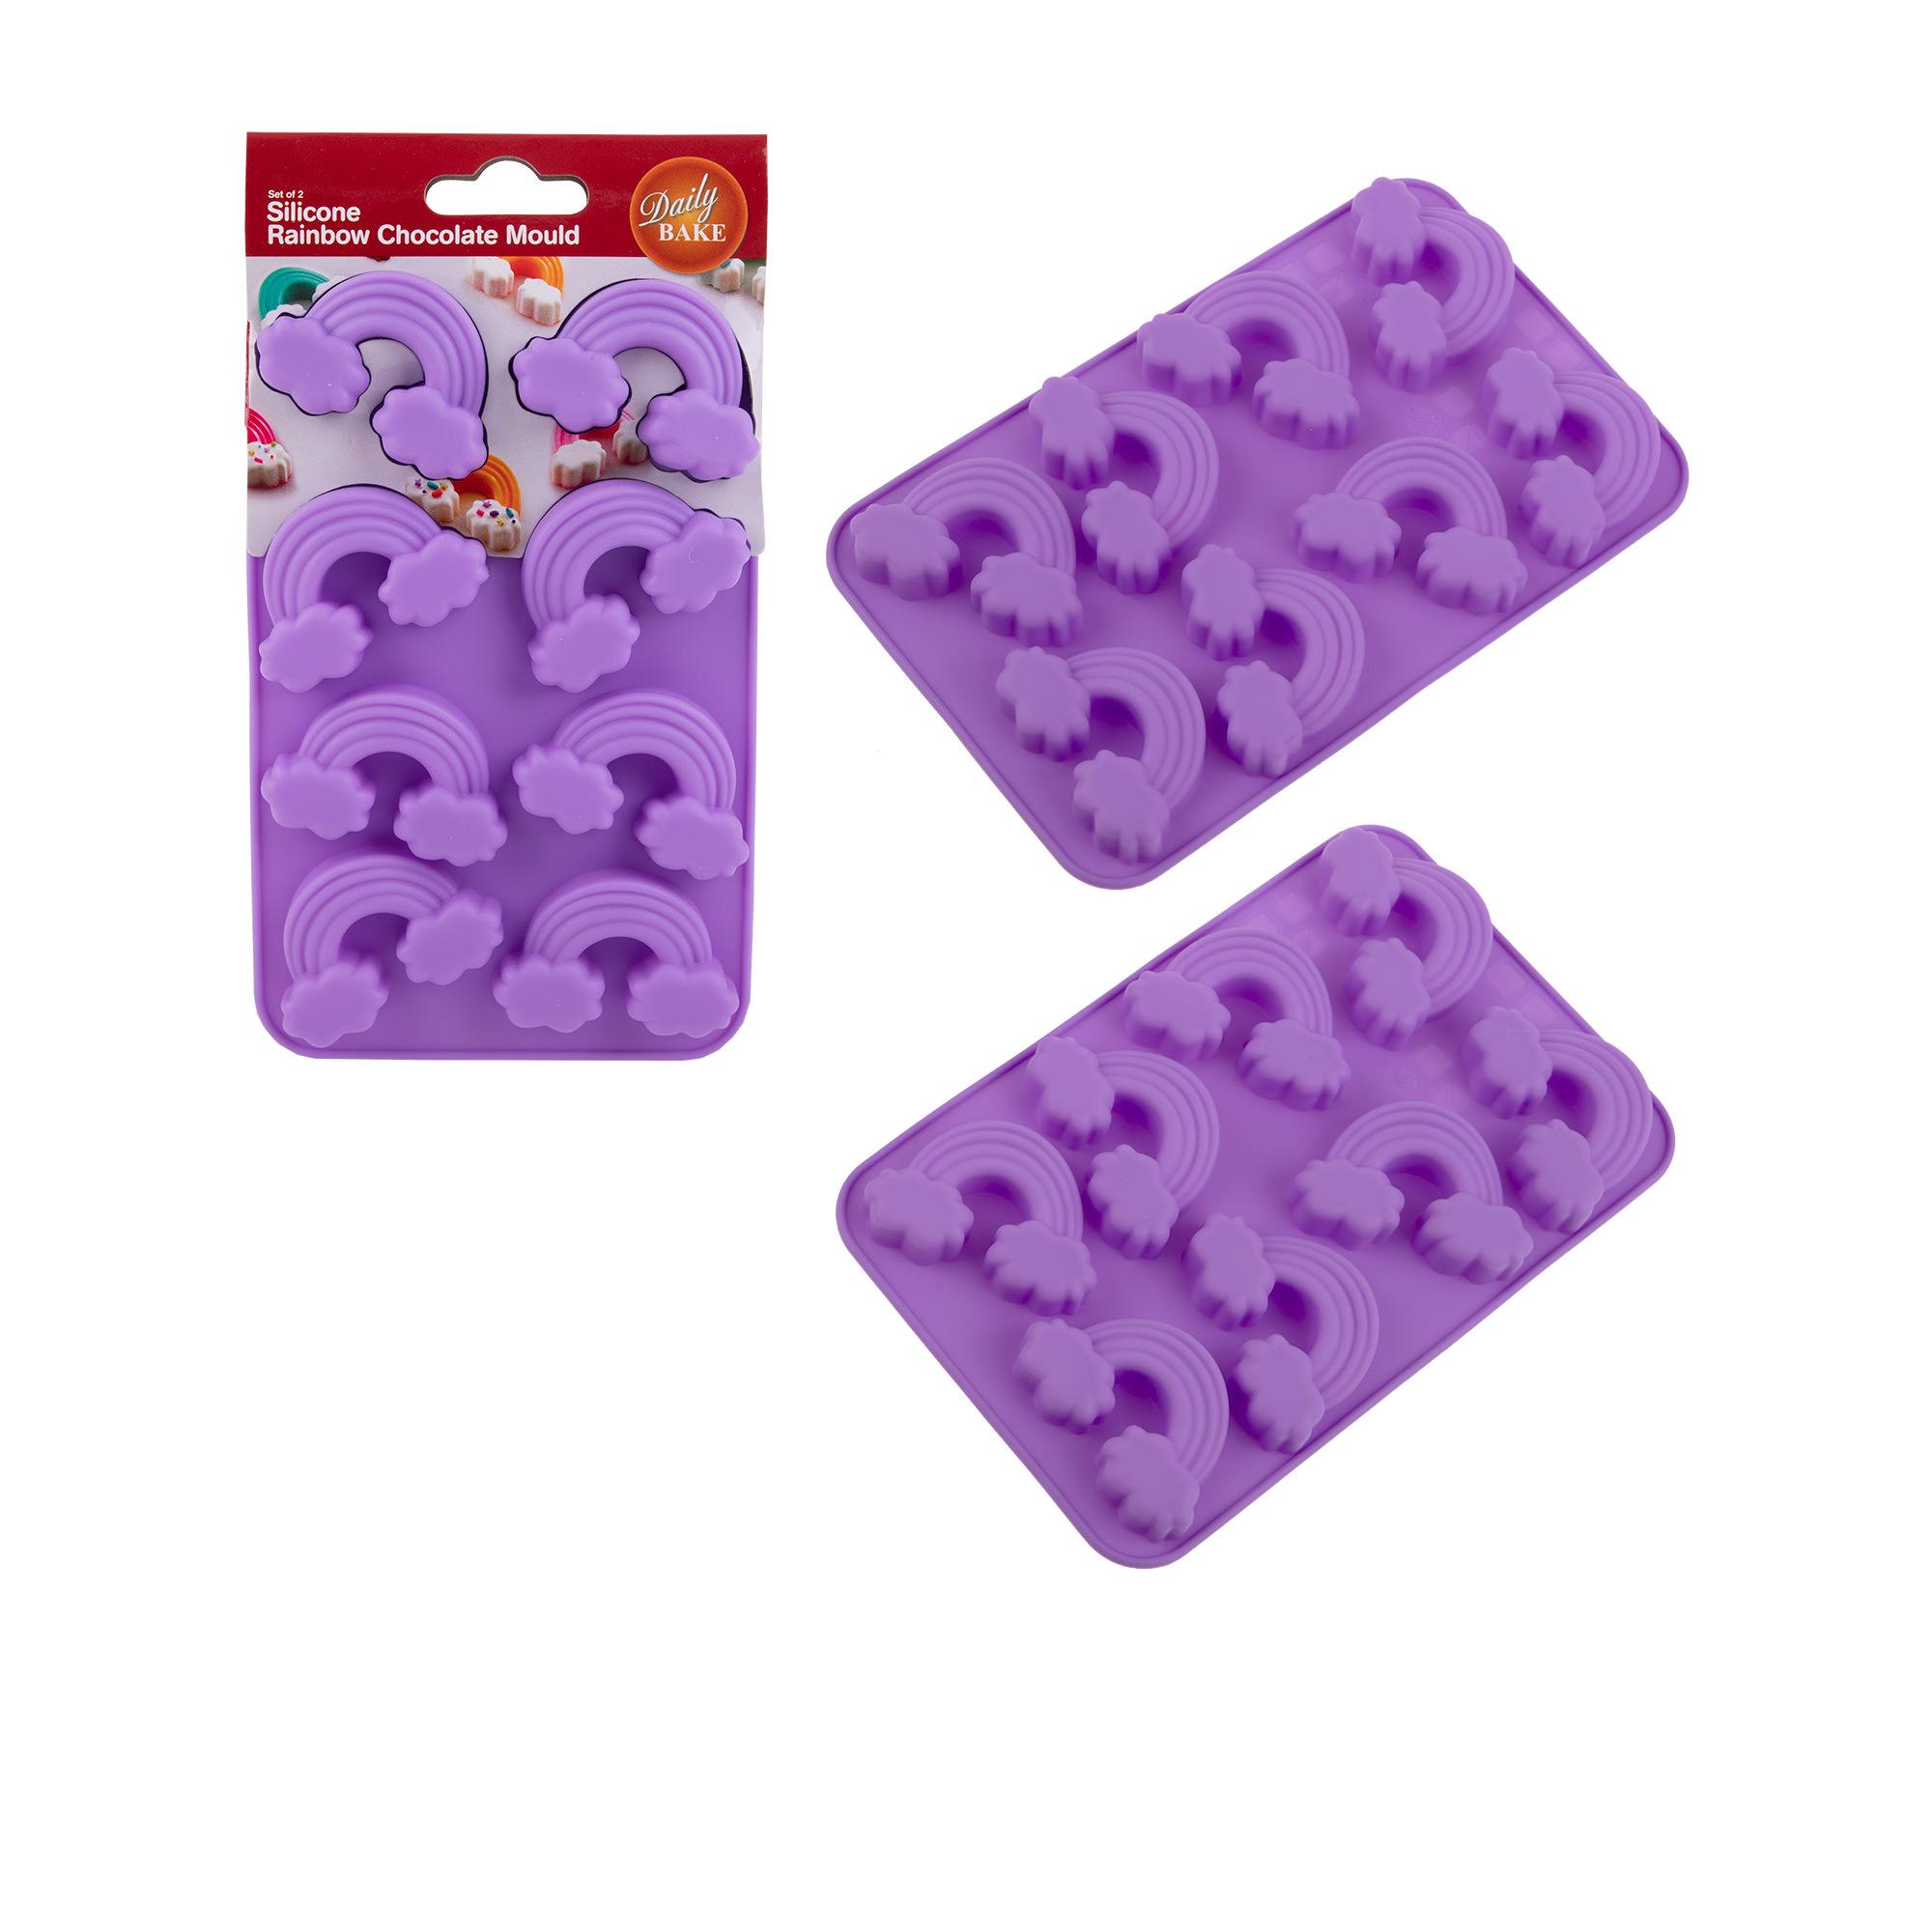 Daily Bake Rainbow Chocolate Mould 8 Cup Set 2pc Purple Image 3